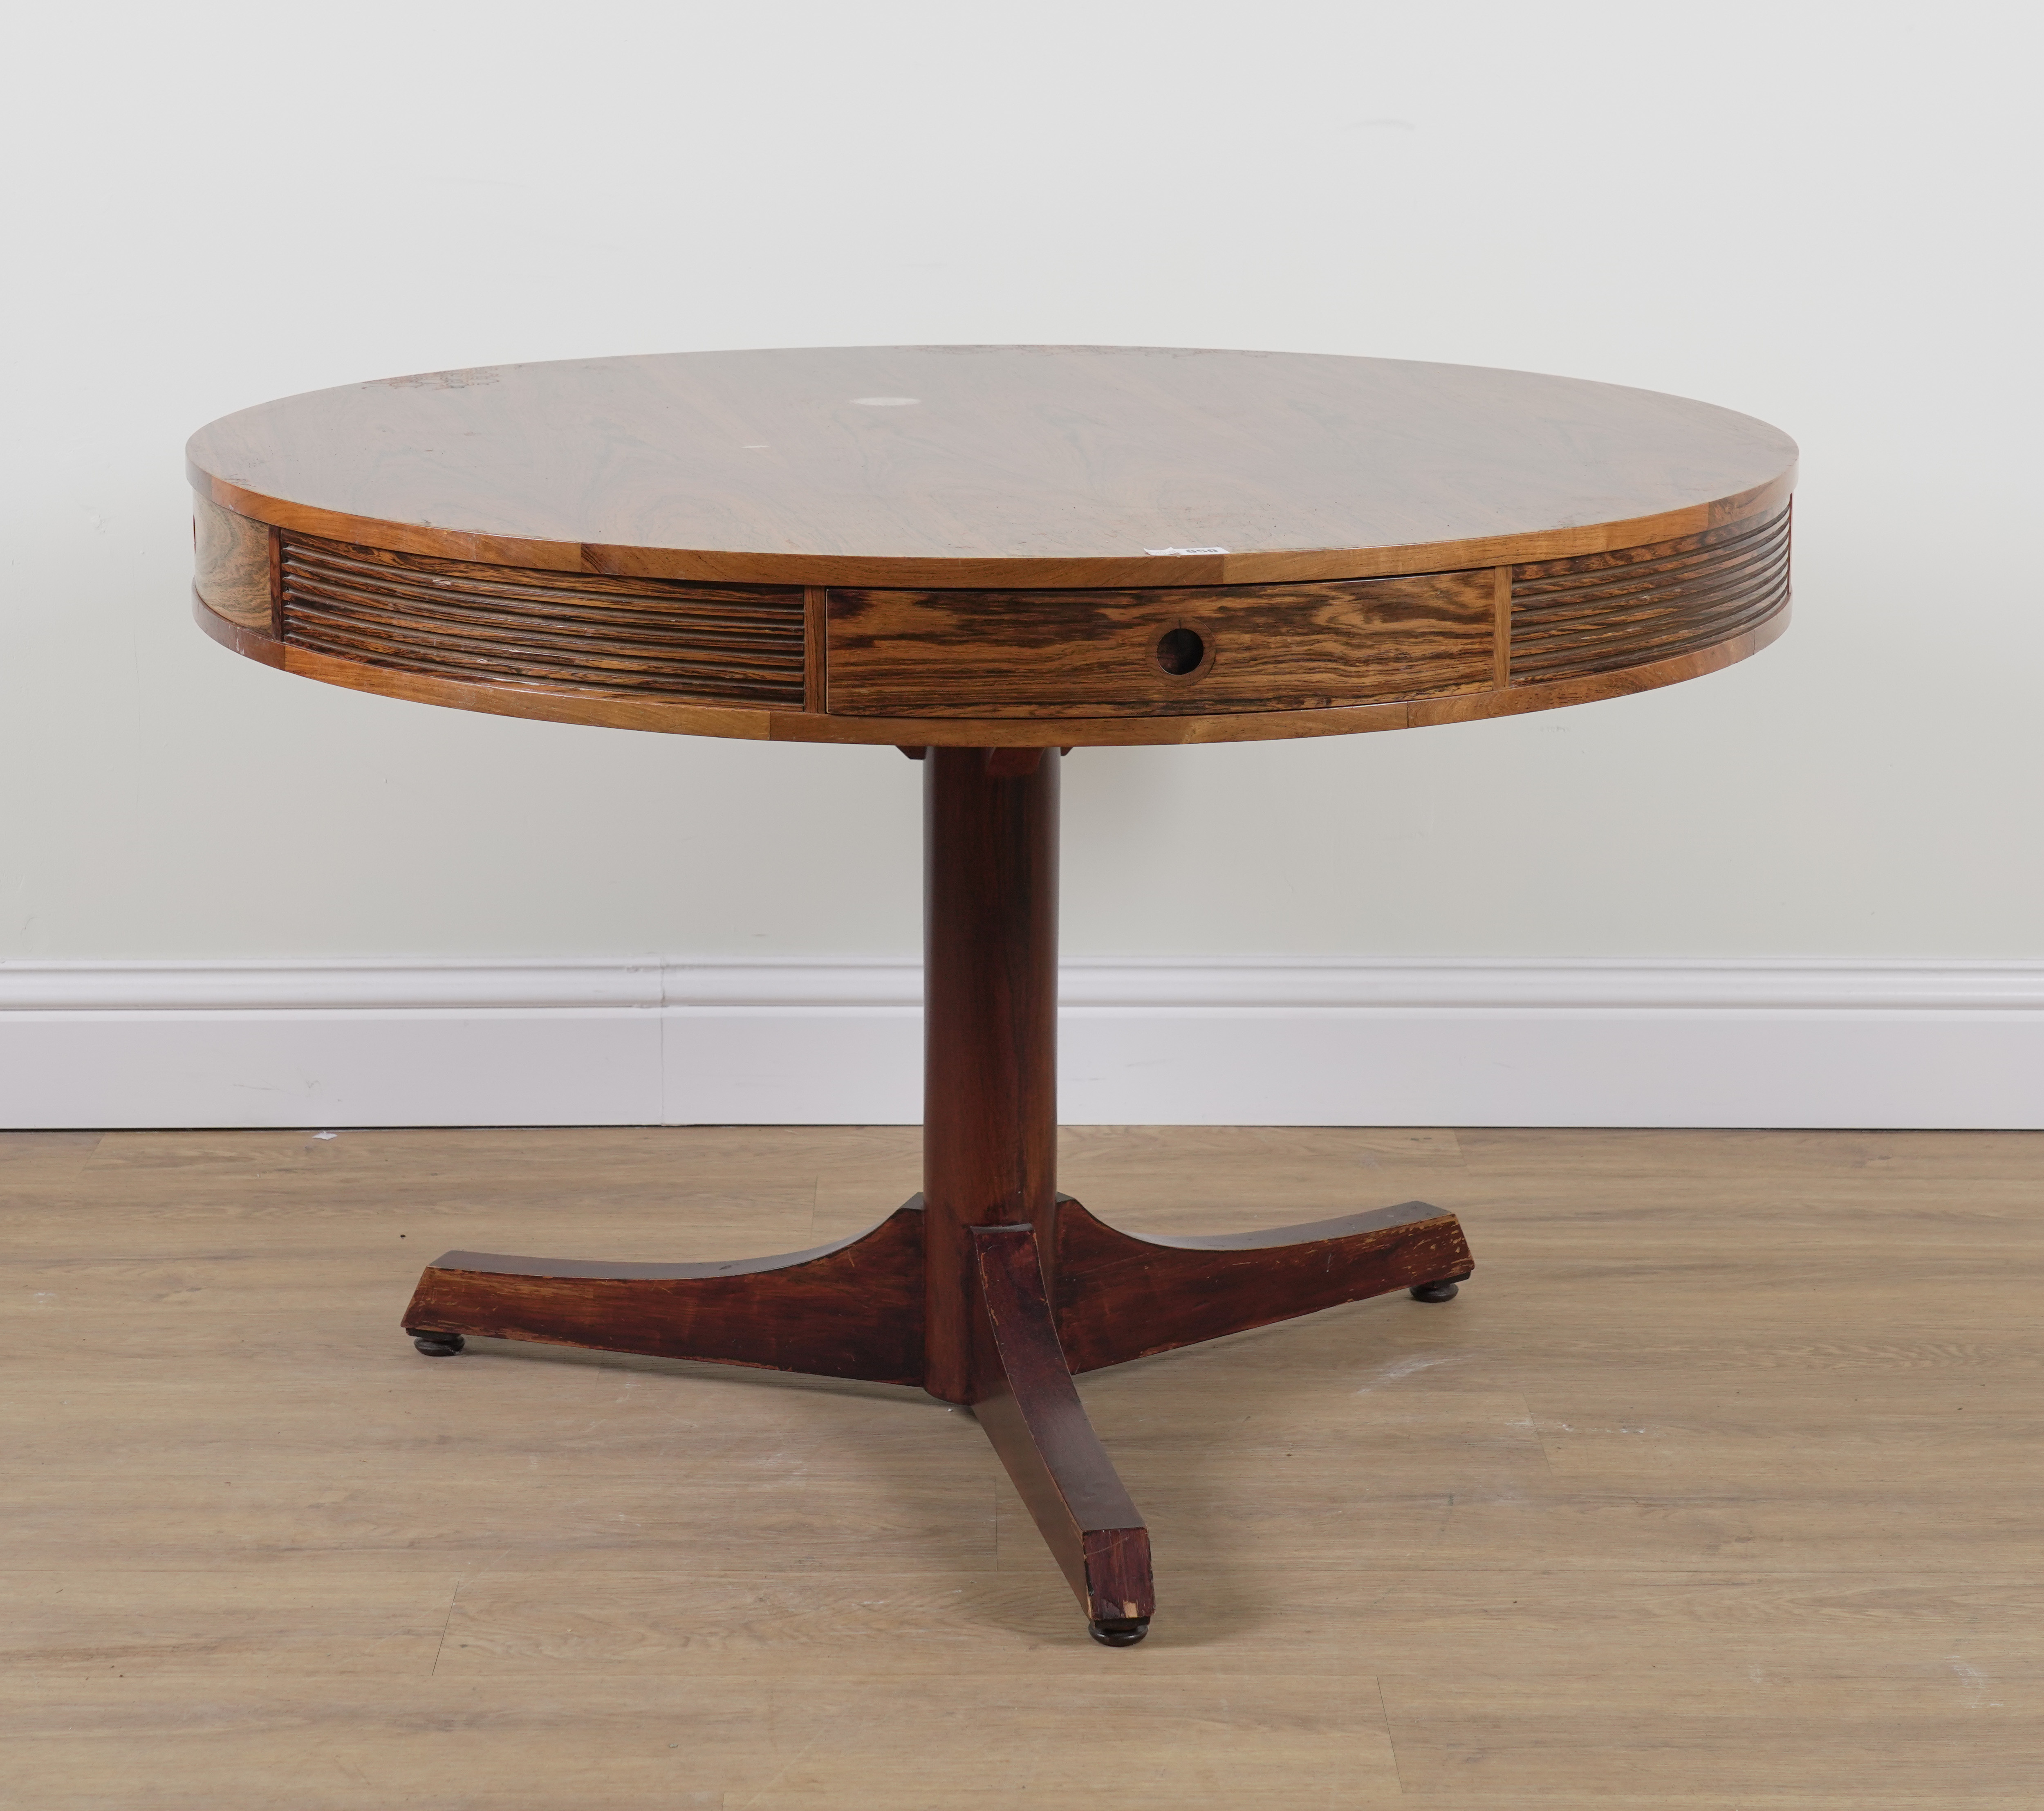 PROBABLY ARCHIE SHINE FOR HEALS FURNITURE; A MID-20TH CENTURY ROSEWOOD CIRCULAR DINING TABLE